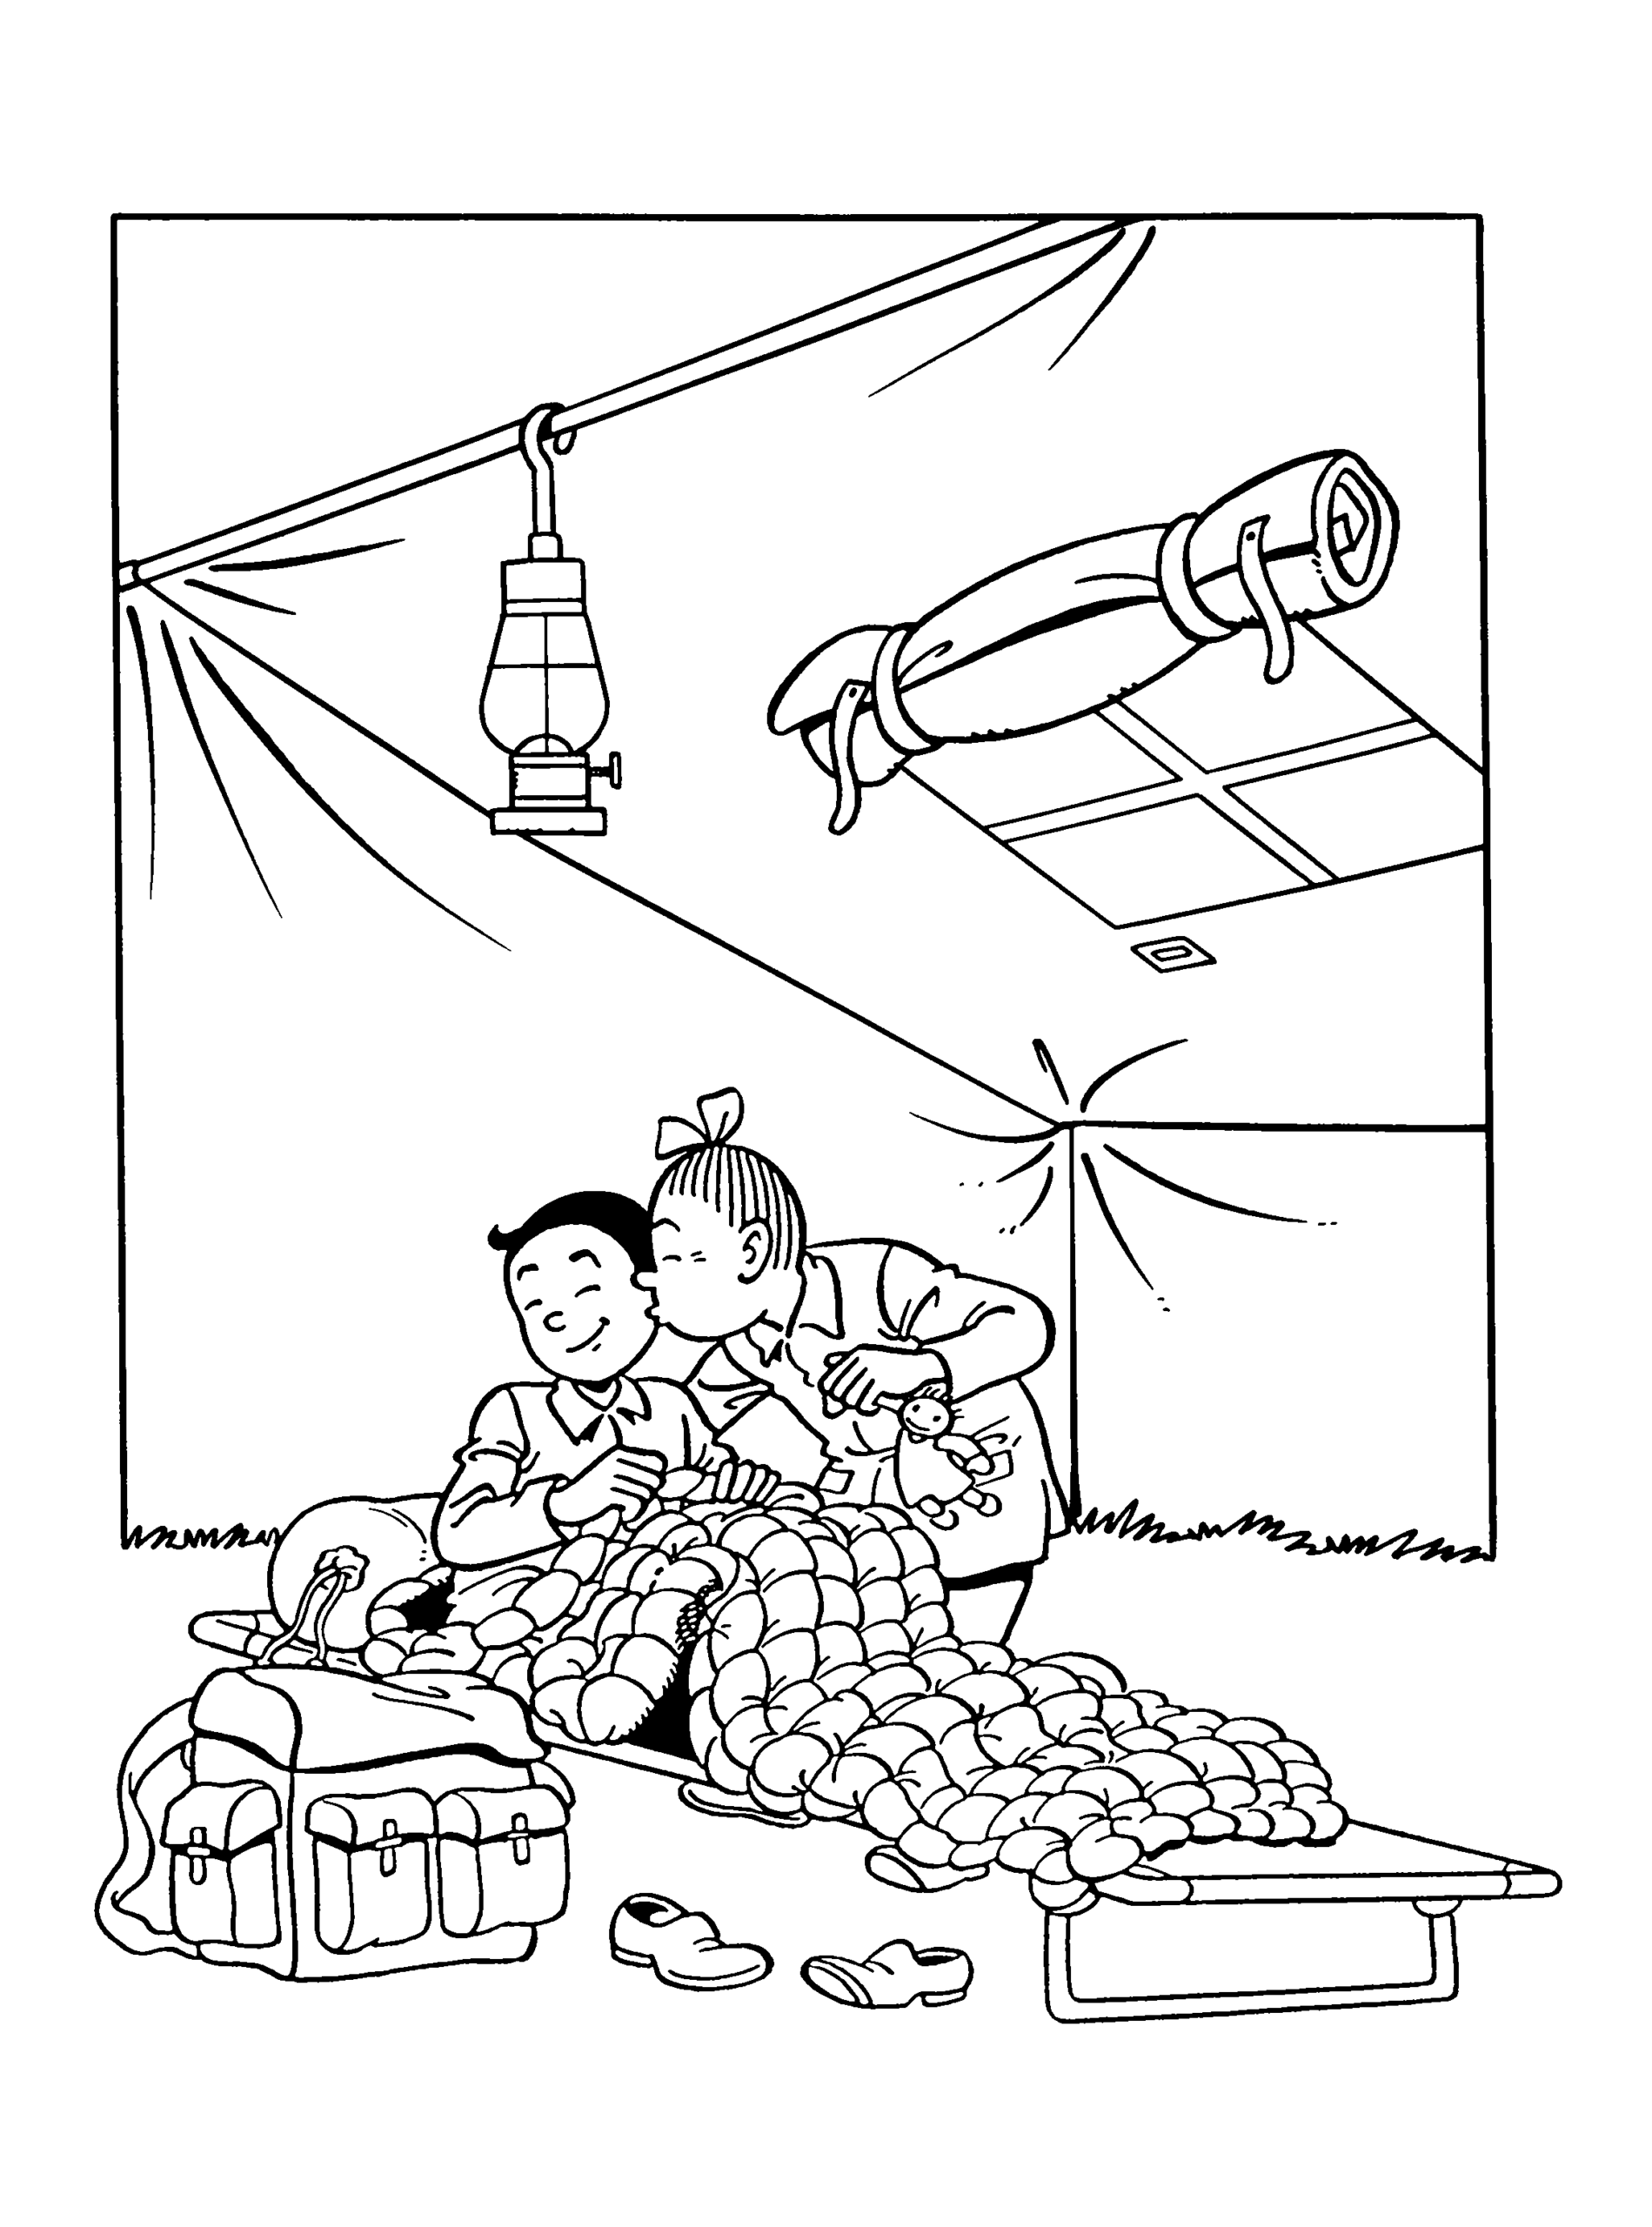 Spike and Suzy Coloring Pages Cartoons spike and suzy 10 Printable 2020 5898 Coloring4free